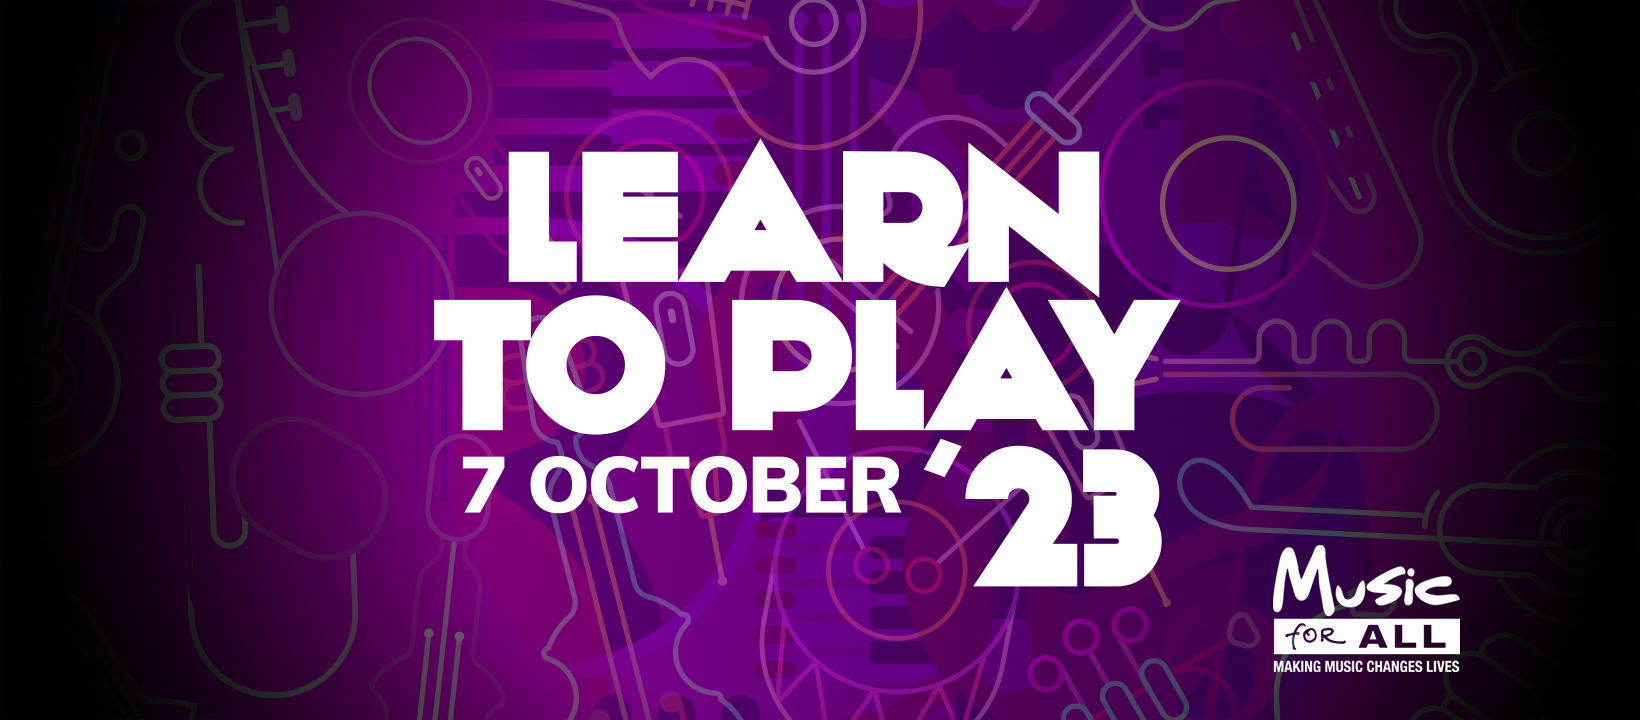 White text reading "Music for all: Making Music Changes Lives. Learn to Play, 7 October '23", on a purple background